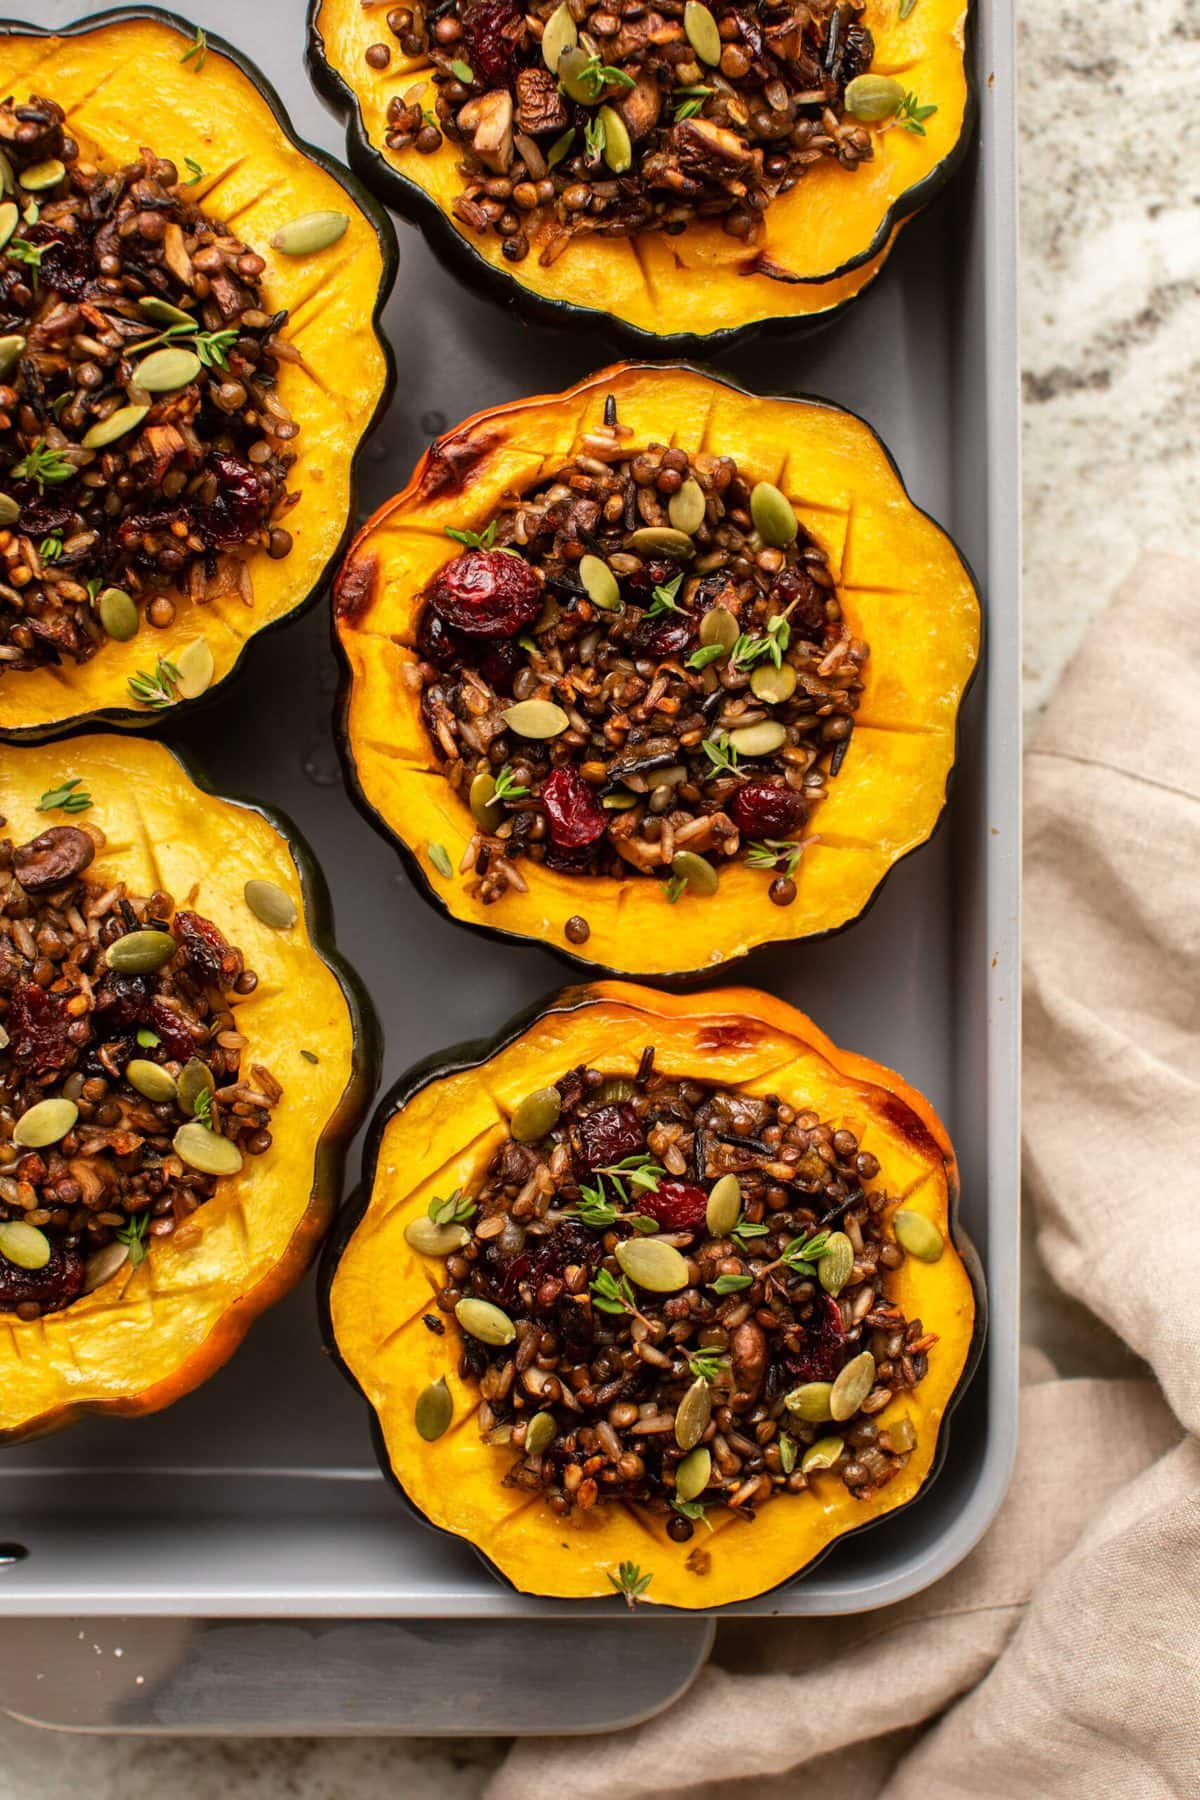 Cooked acorn squash stuffed with a crispy lentil and rice filling, then topped with pumpkin seeds